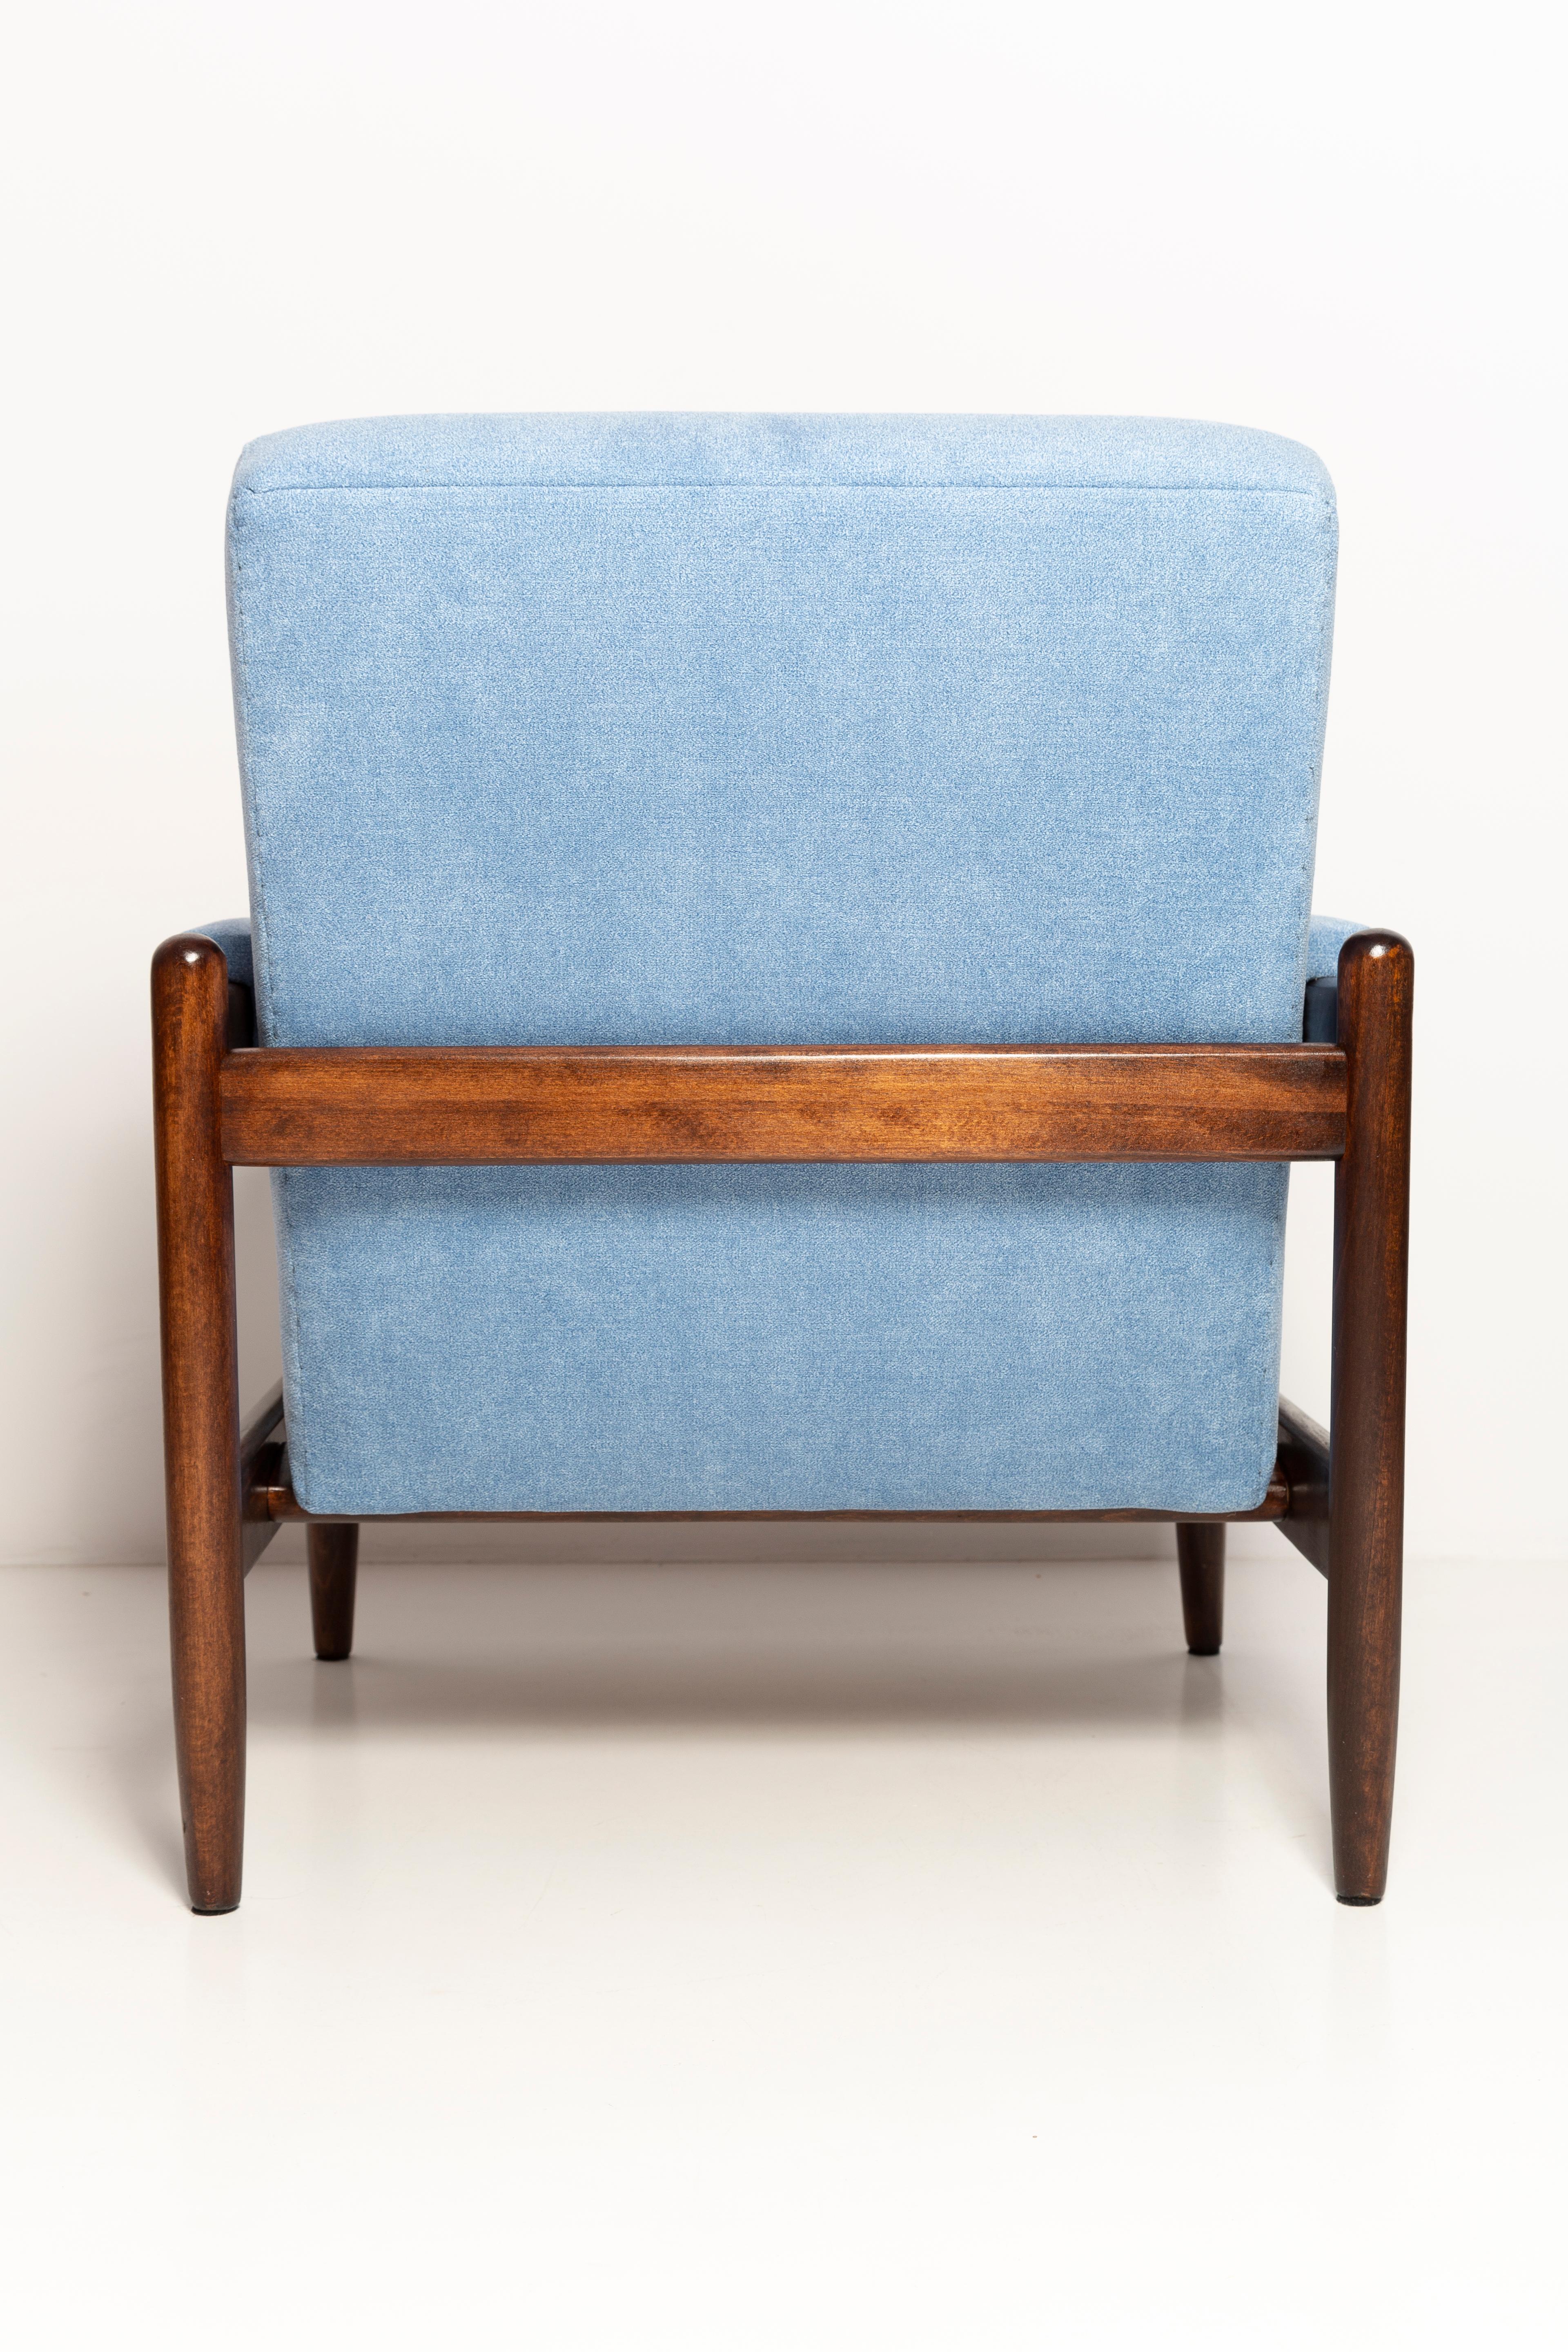 Set of Two Mid Century Blue Velvet Vintage Armchairs, Walnut Wood, Europe, 1960s For Sale 3